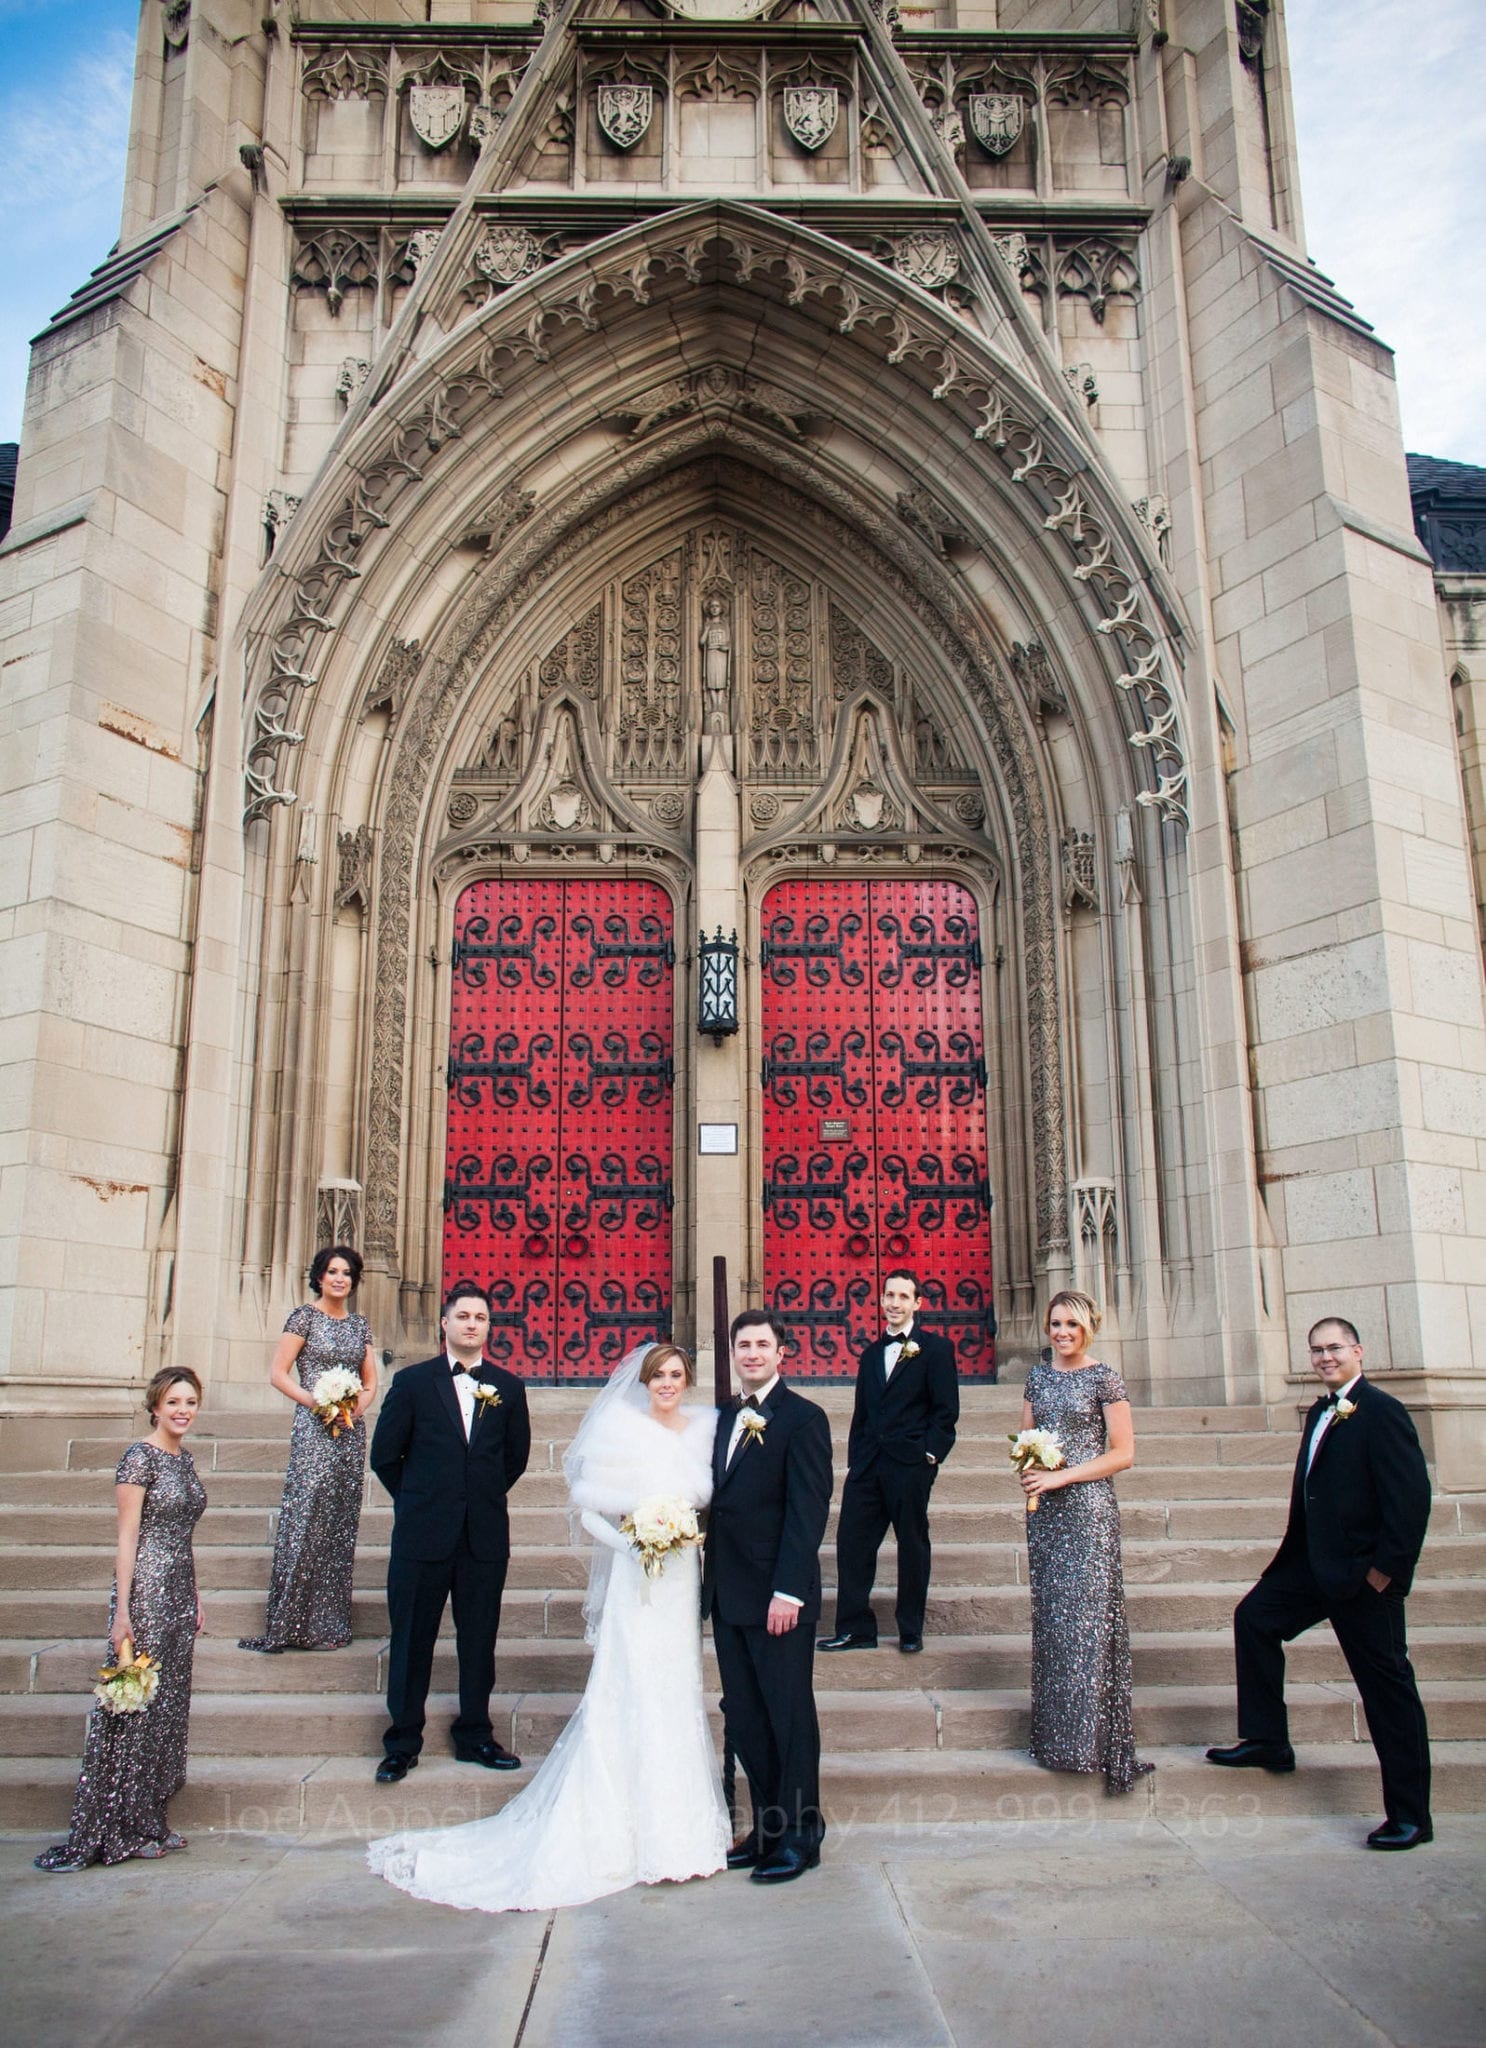 A bridal party stands on the steps at the back of heinz chapel. carved stone and red doors in the background